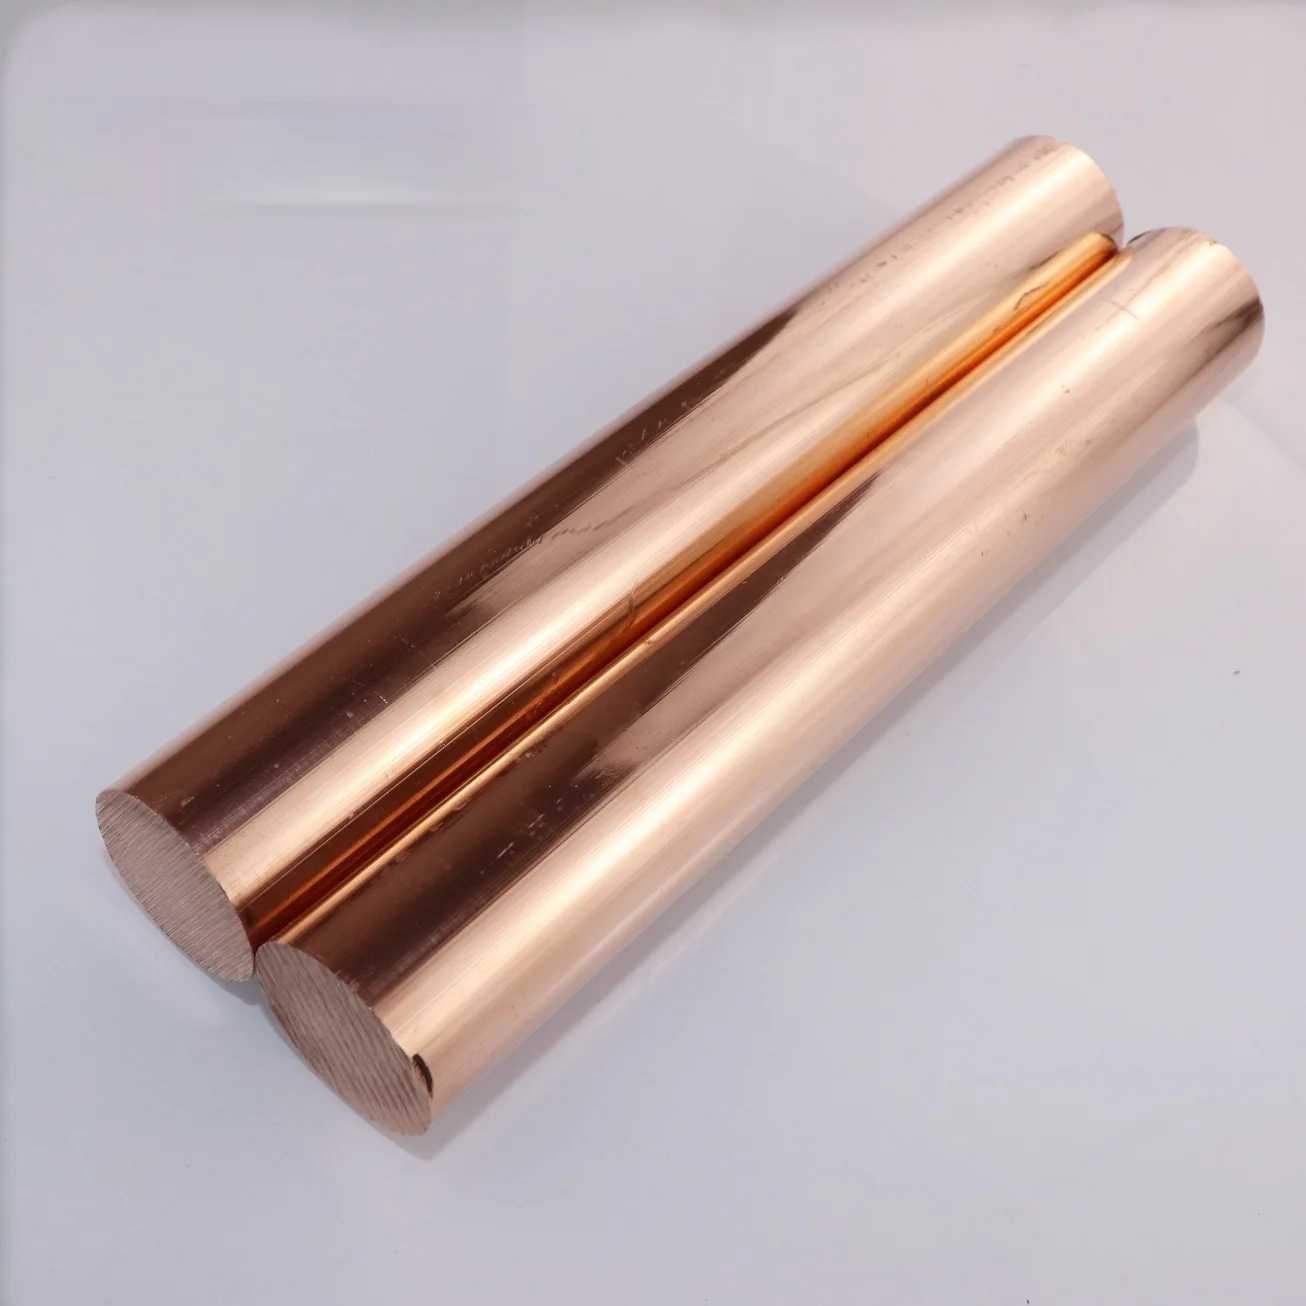 

Copper Bars Rods 14mm 20mm 10mm 12mm Round Rods Blank Scales Blade Length 200mm T2 Copper Bar Stick DIY One Piece